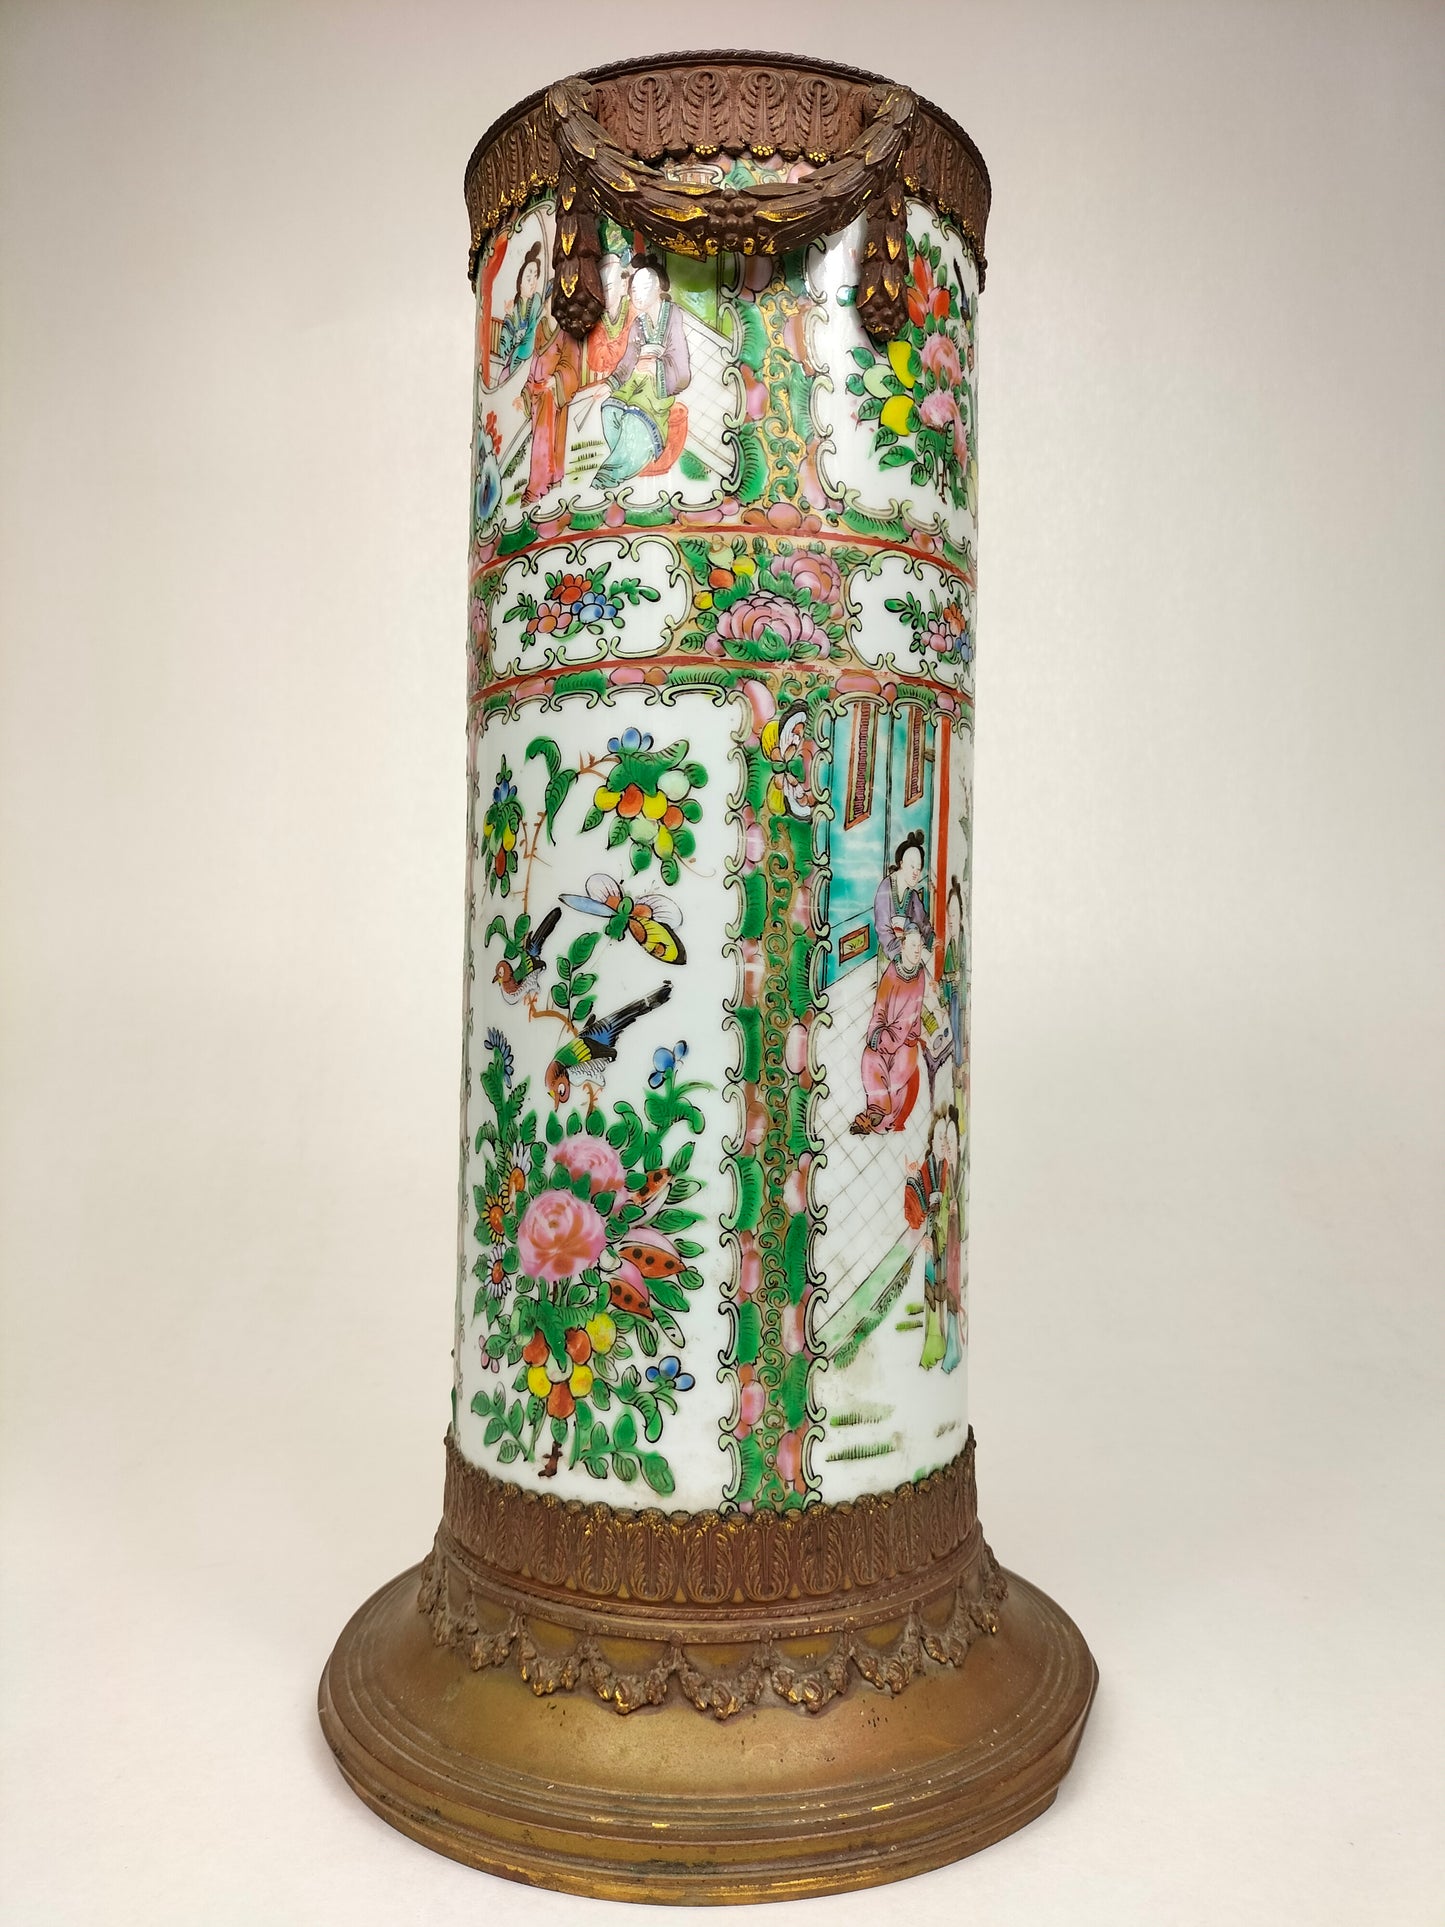 Antique Chinese canton rose medallion vase inlaid in a gilded frame // Qing Dynasty - 19th century